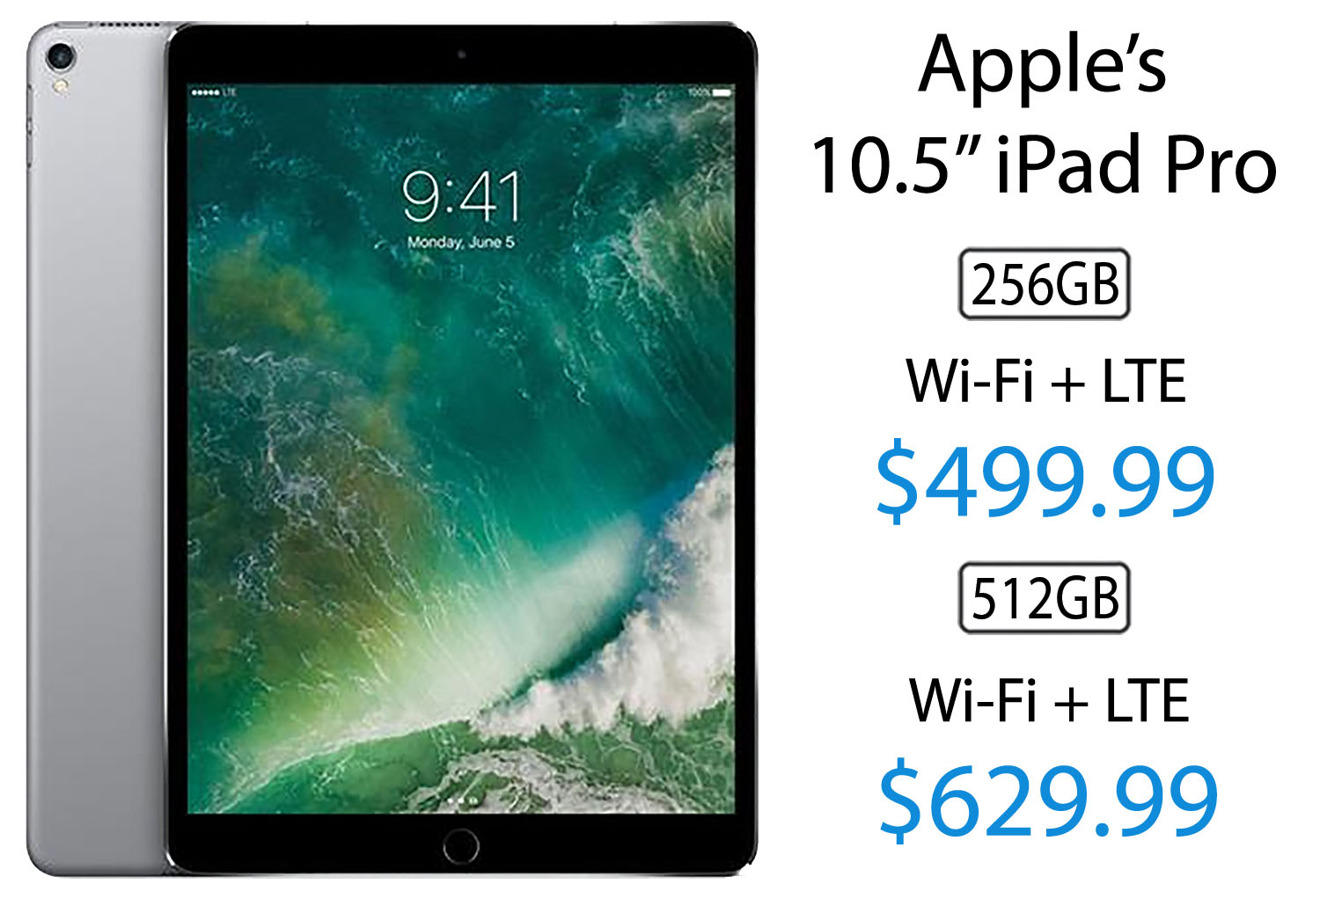 Woot has 256GB 10.5-inch iPad Pros w/ LTE on sale for $499, 512GB